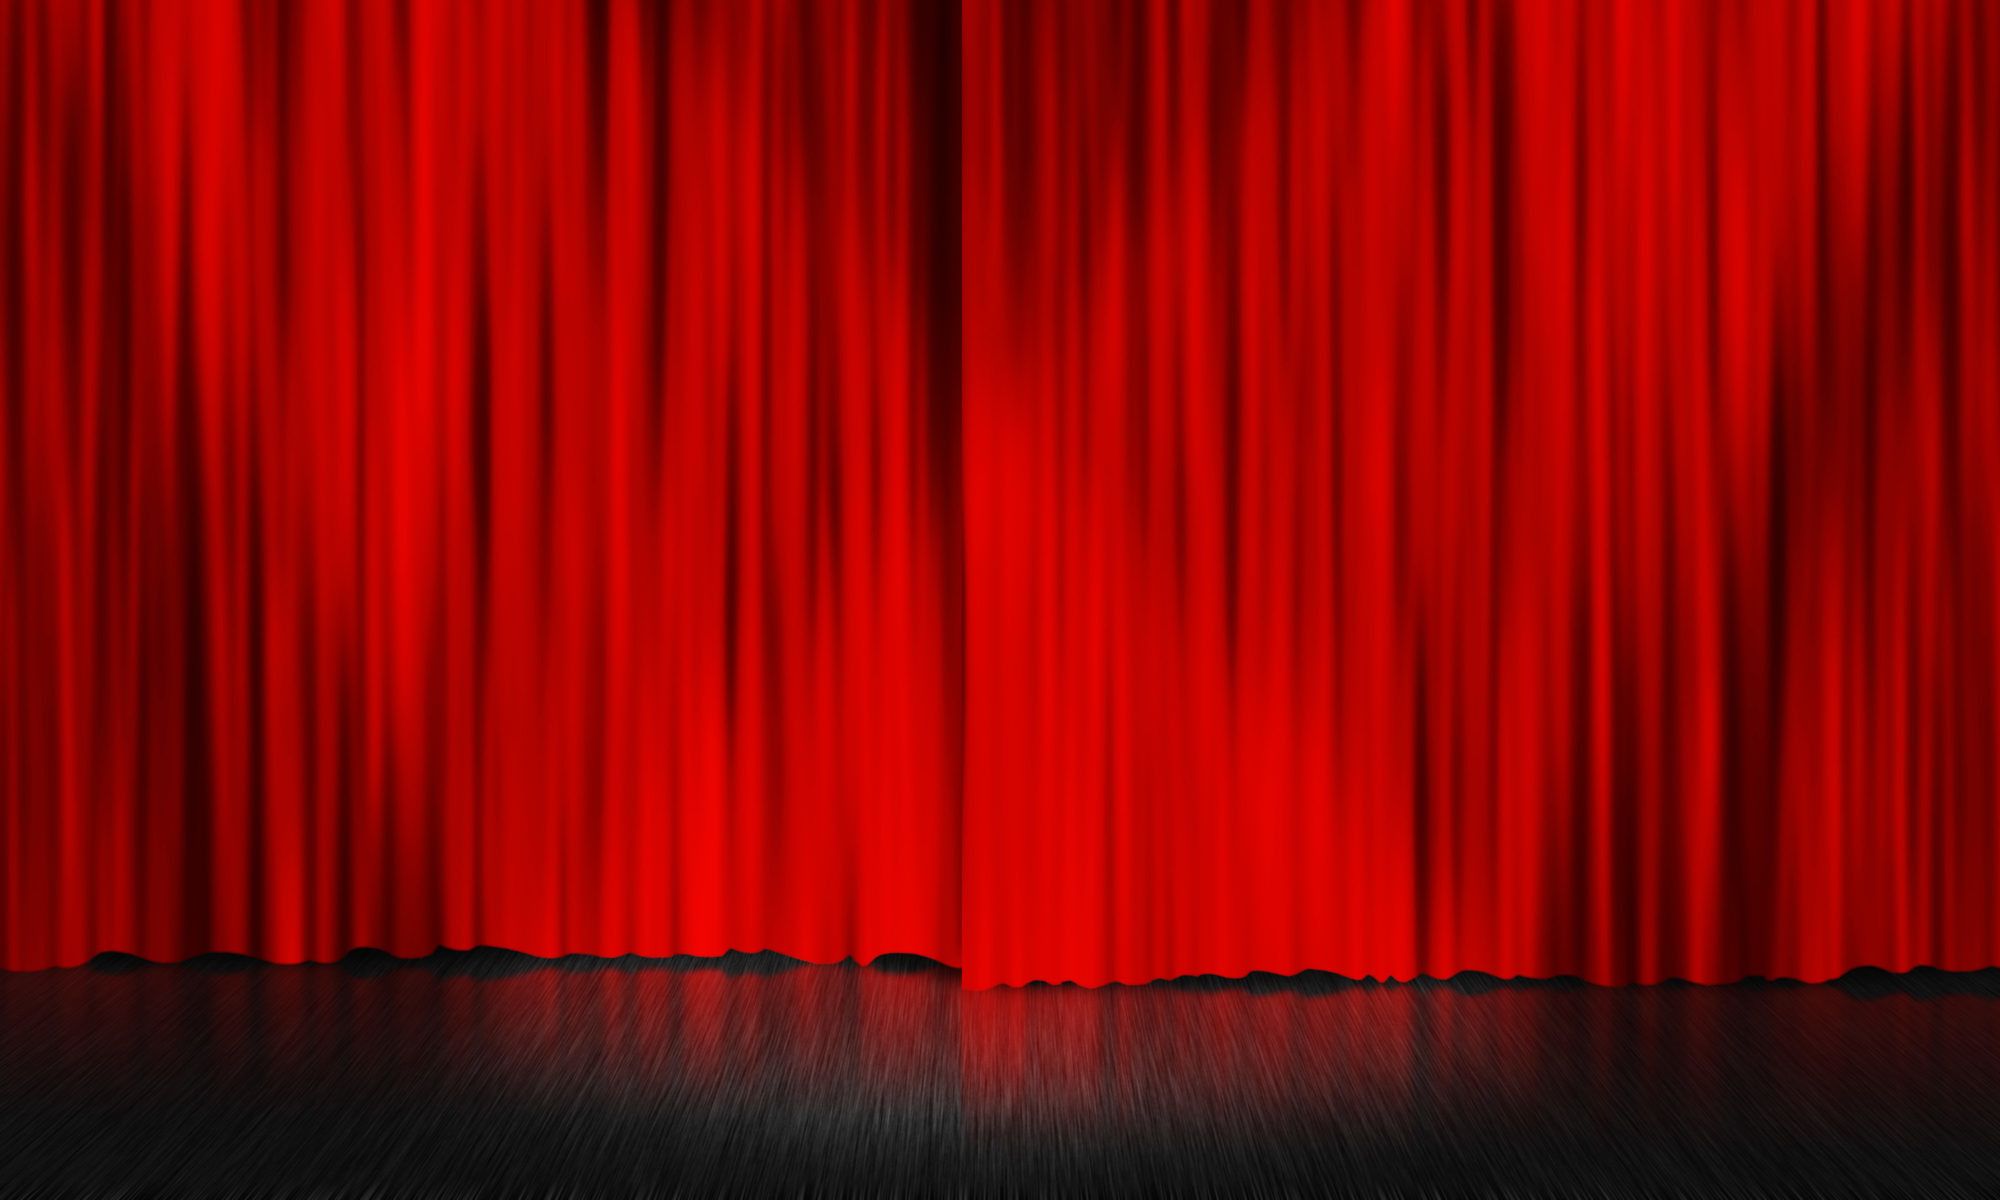 650 Conference Stage Background Stock Videos and RoyaltyFree Footage   iStock